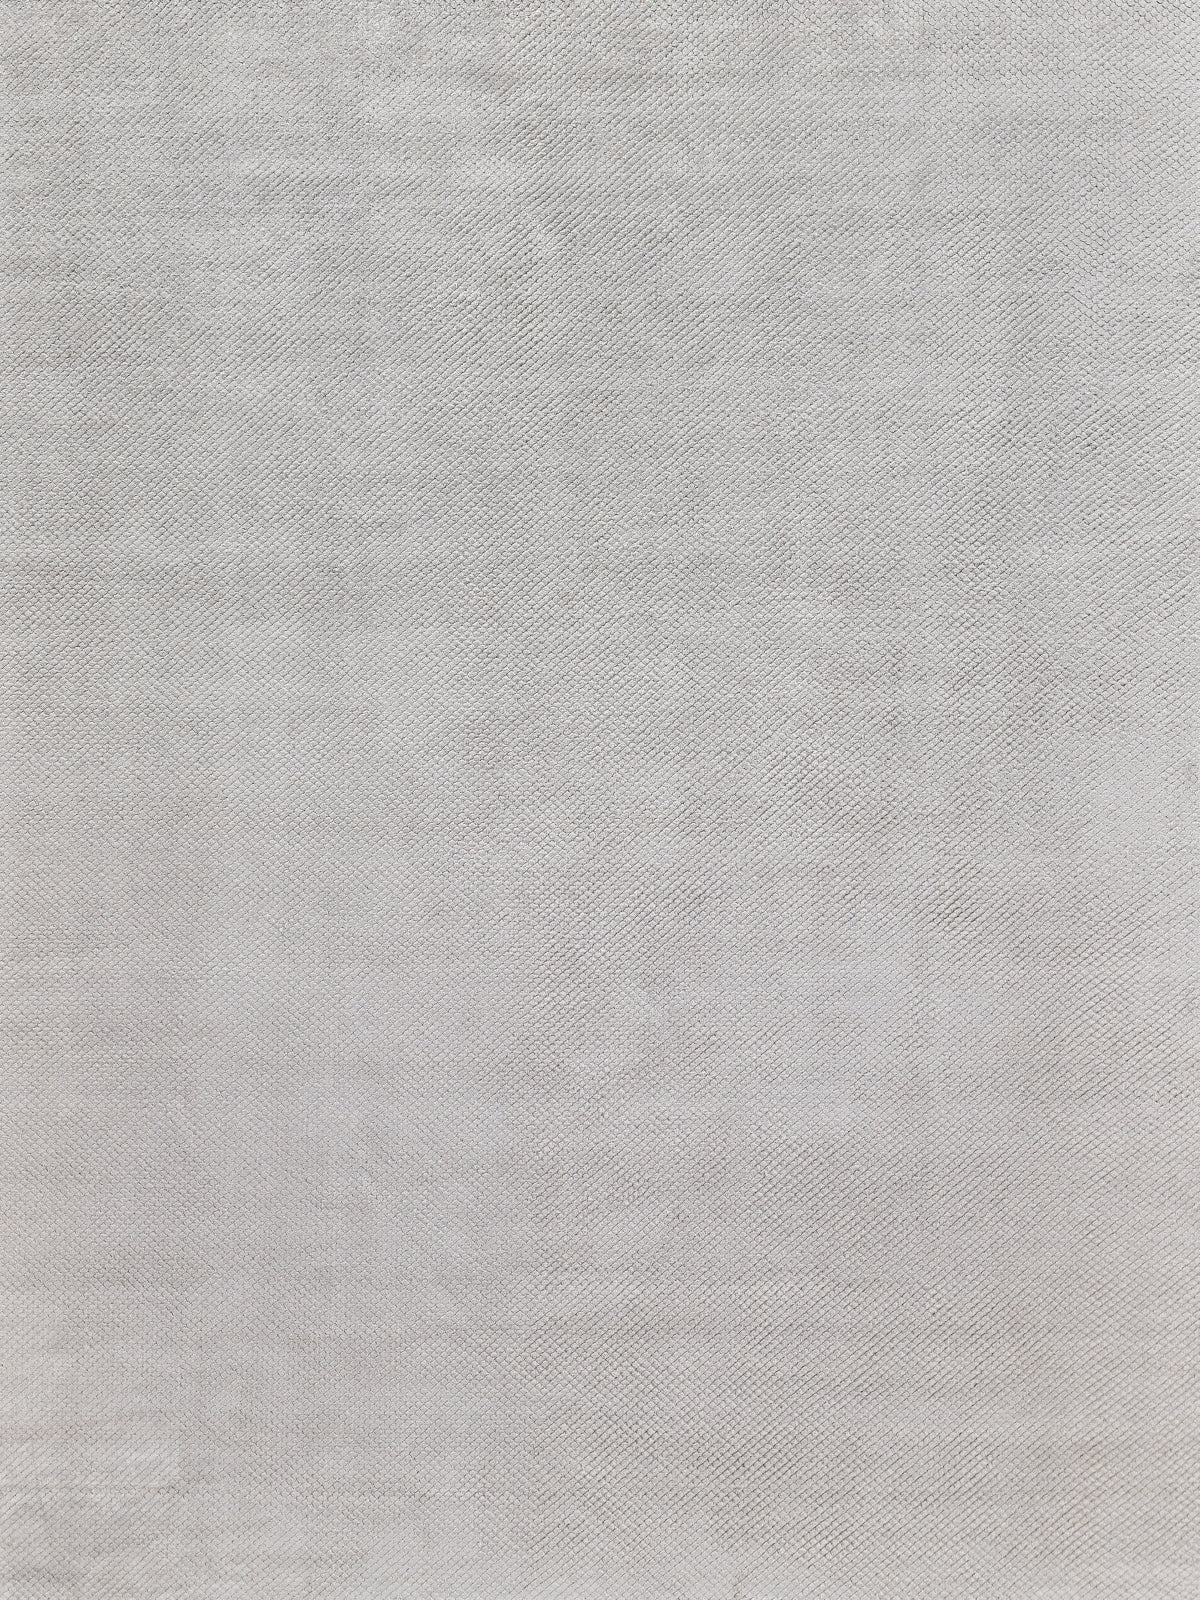 Exquisite Rugs Pearl 4417 Silver Area Rug